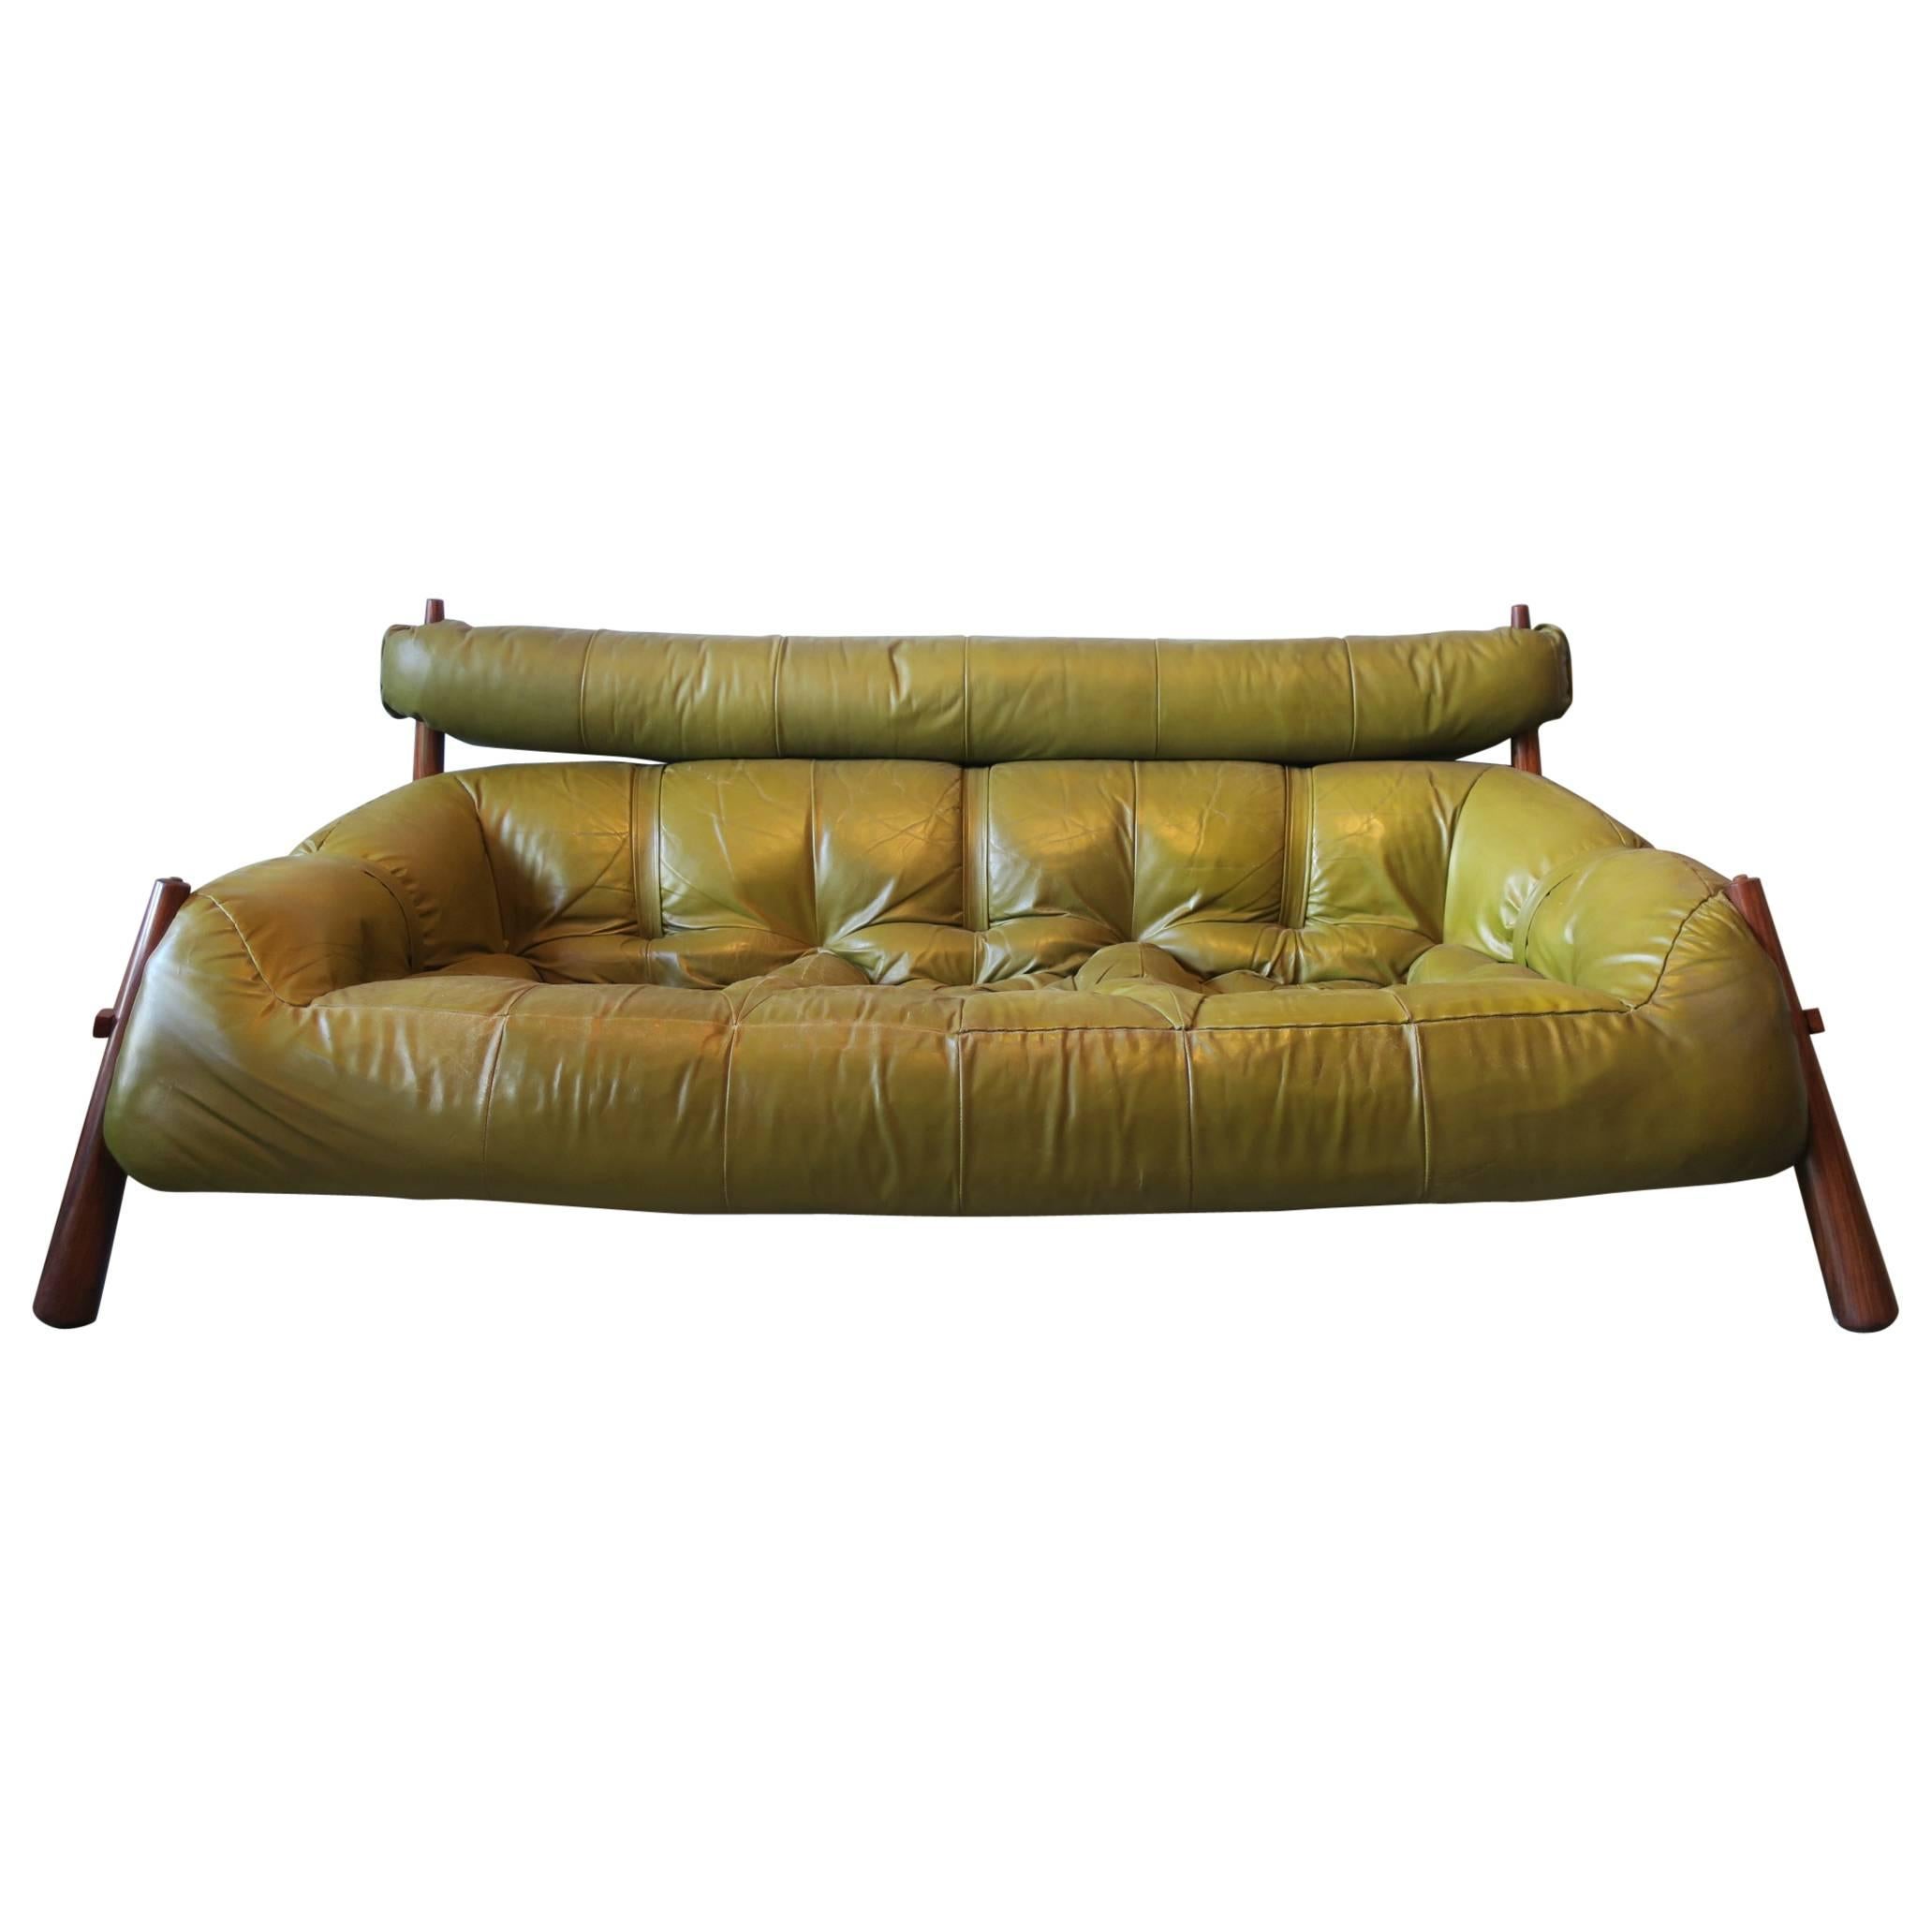 Percival Lafer Three-Seater Rosewood and Leather Sofa Brazil, 1974 Maker's Label For Sale